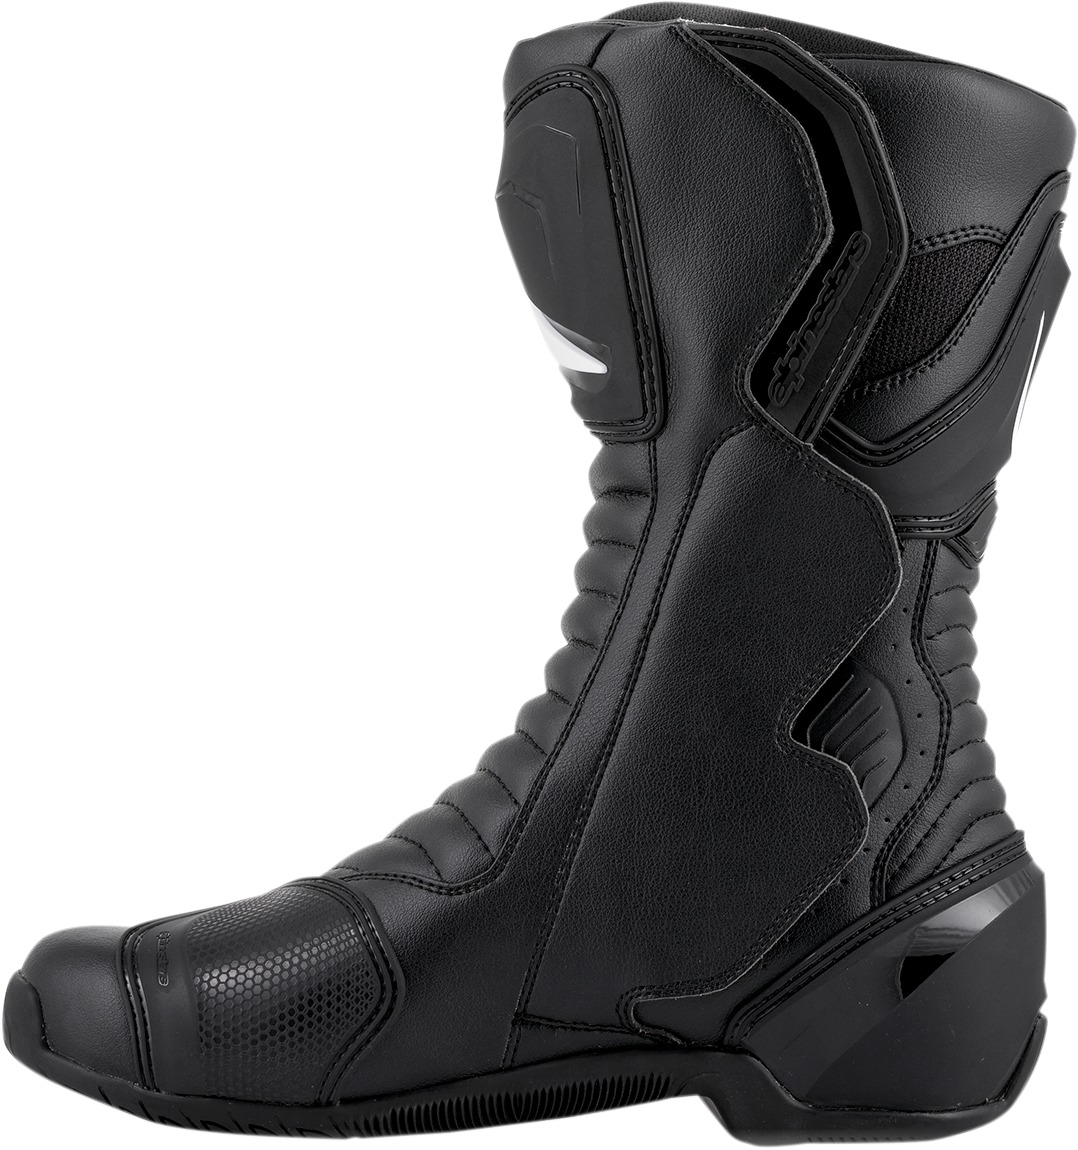 SMX-6 GTX Street Riding Boots Black US 6.5 - Click Image to Close